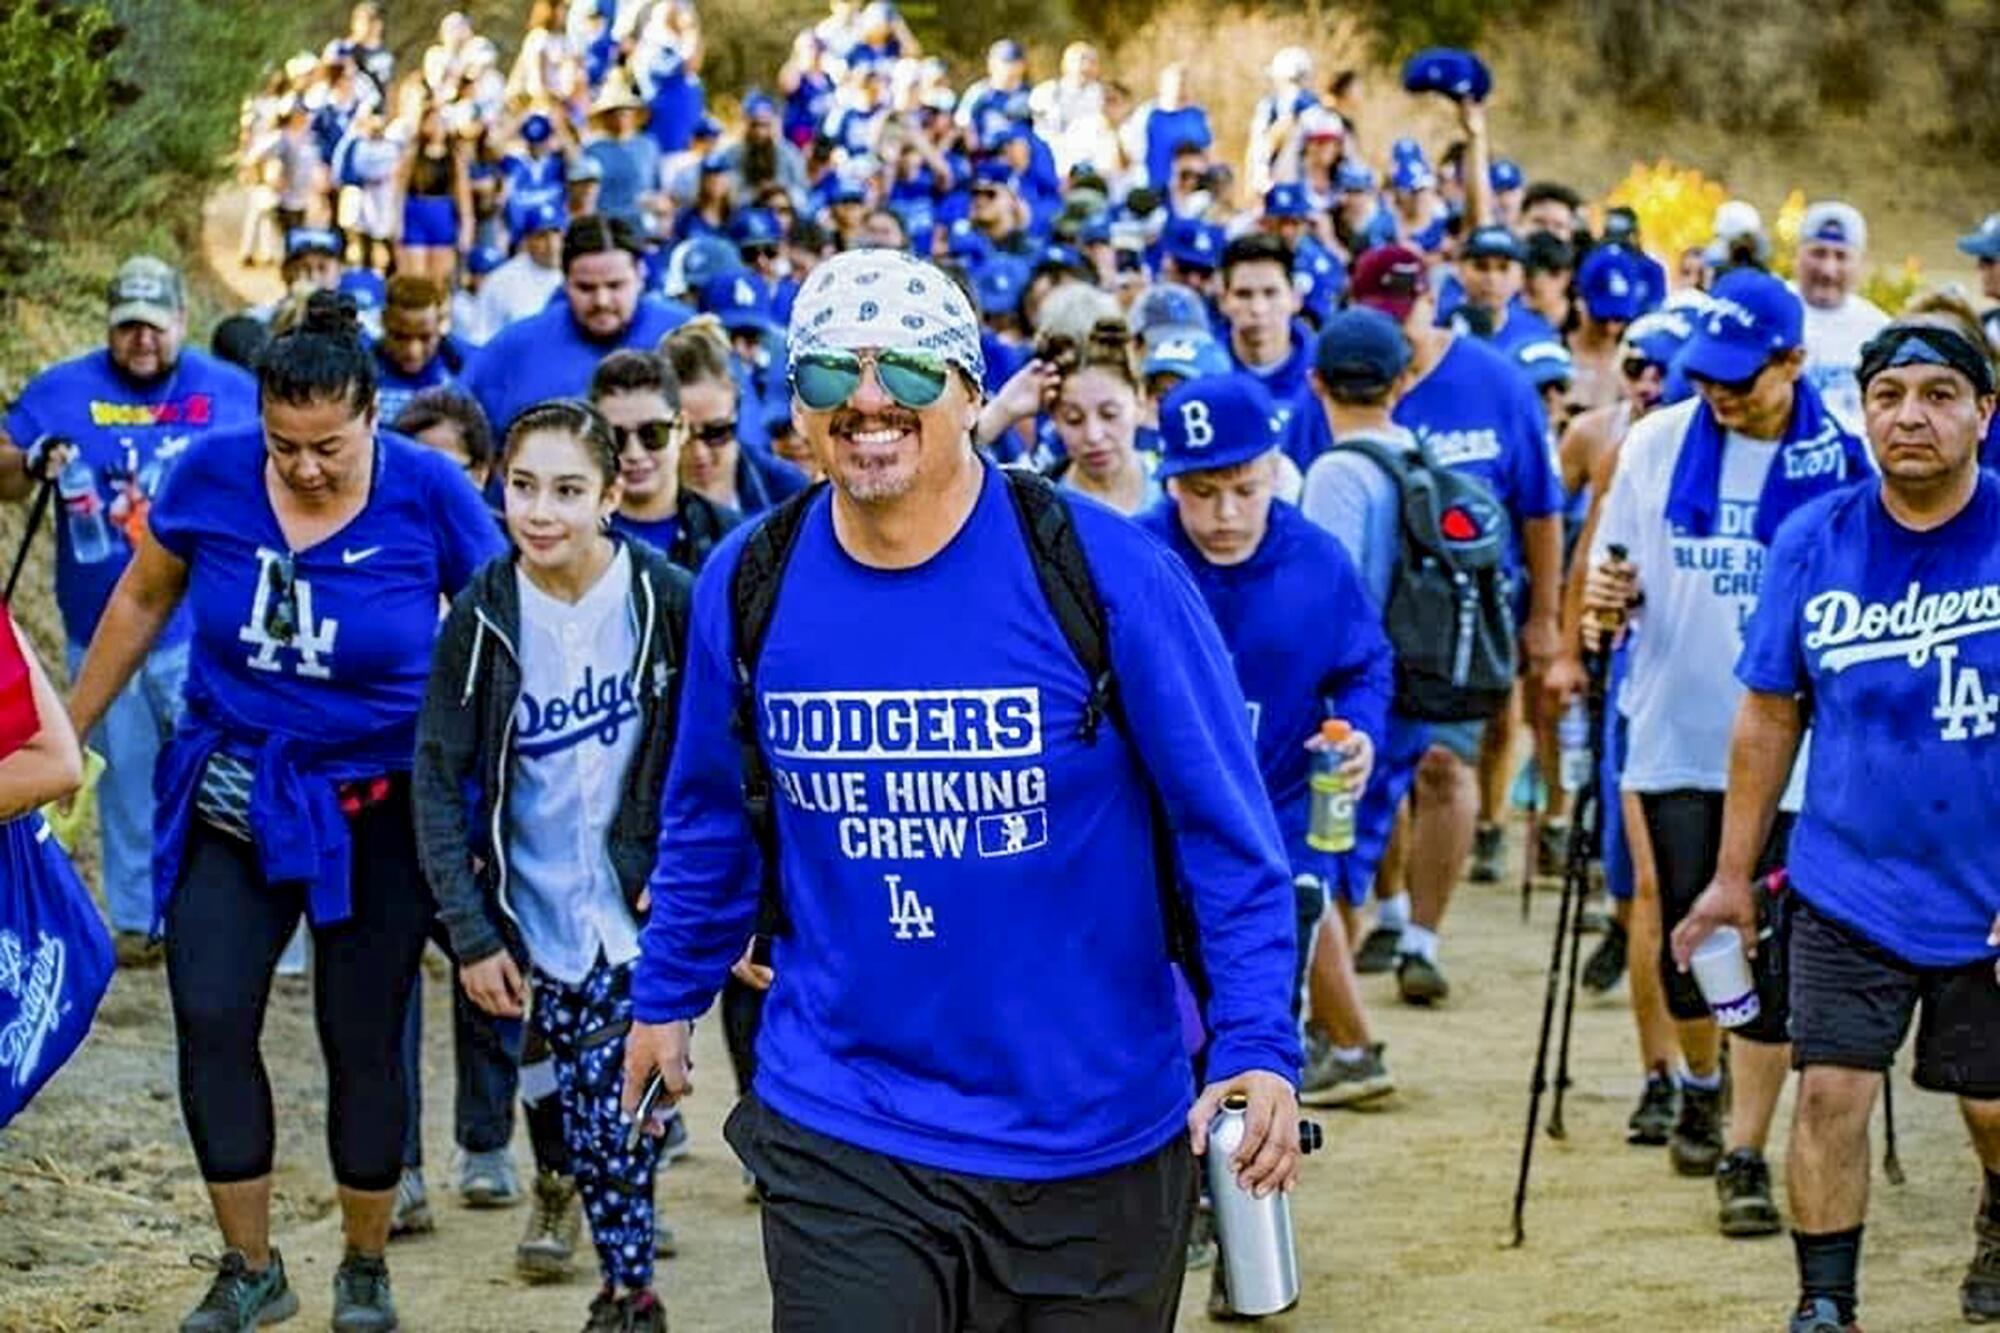  Dodgers Blue Hiking Crew hiking at Griffith Park.